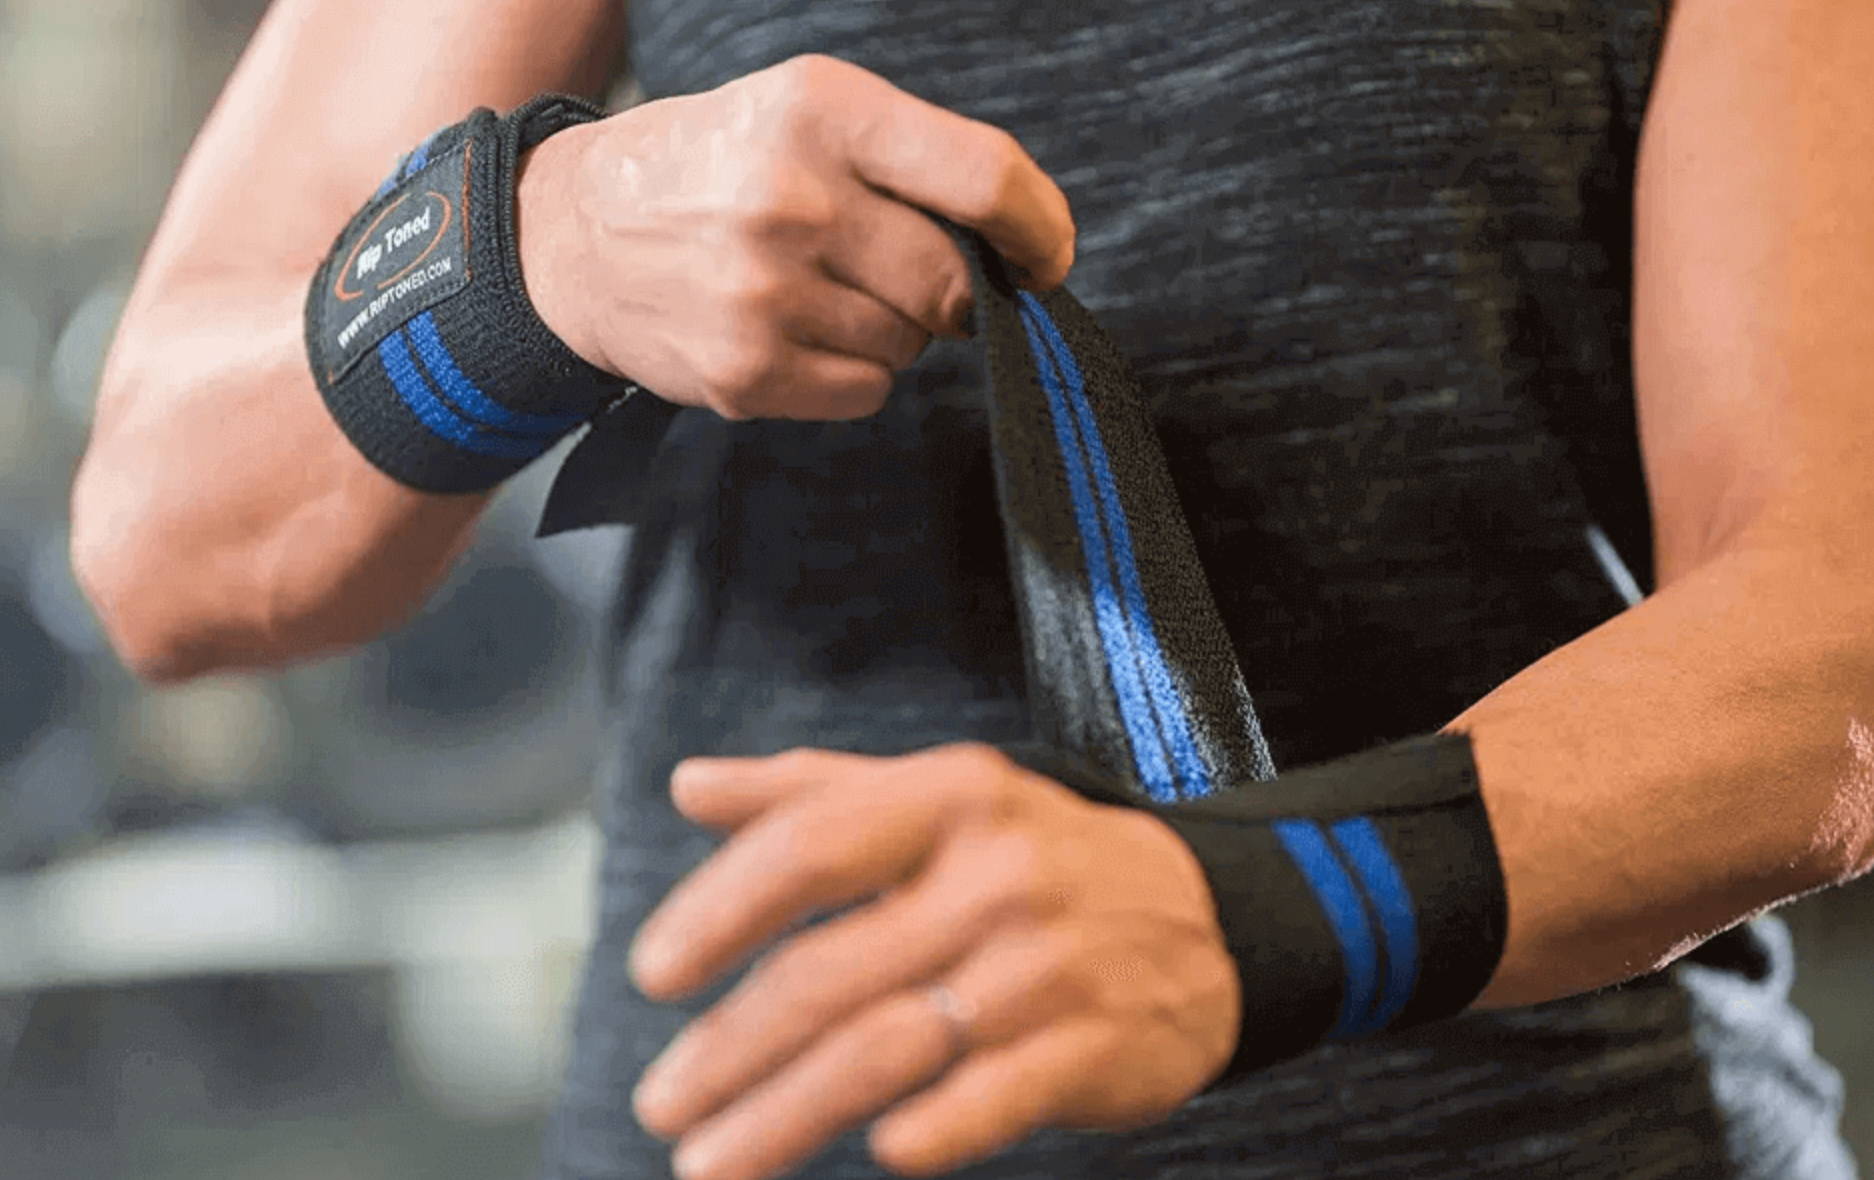 Wrist Wraps in Use